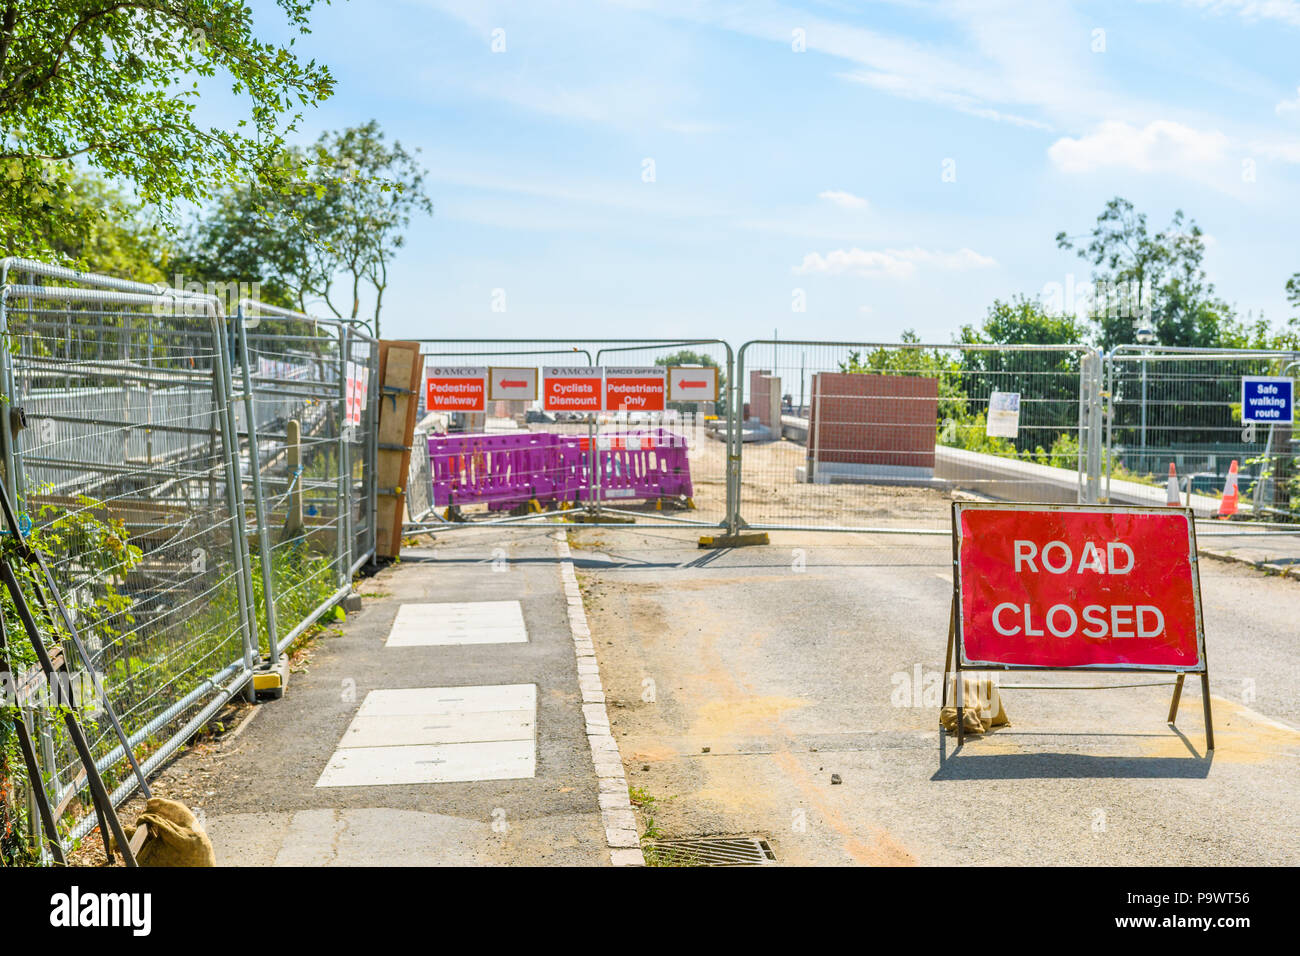 Work in progress raising the road bridge on the Cottingham road over the railway line next to the rail staion at Corby, England, July 2018. Stock Photo